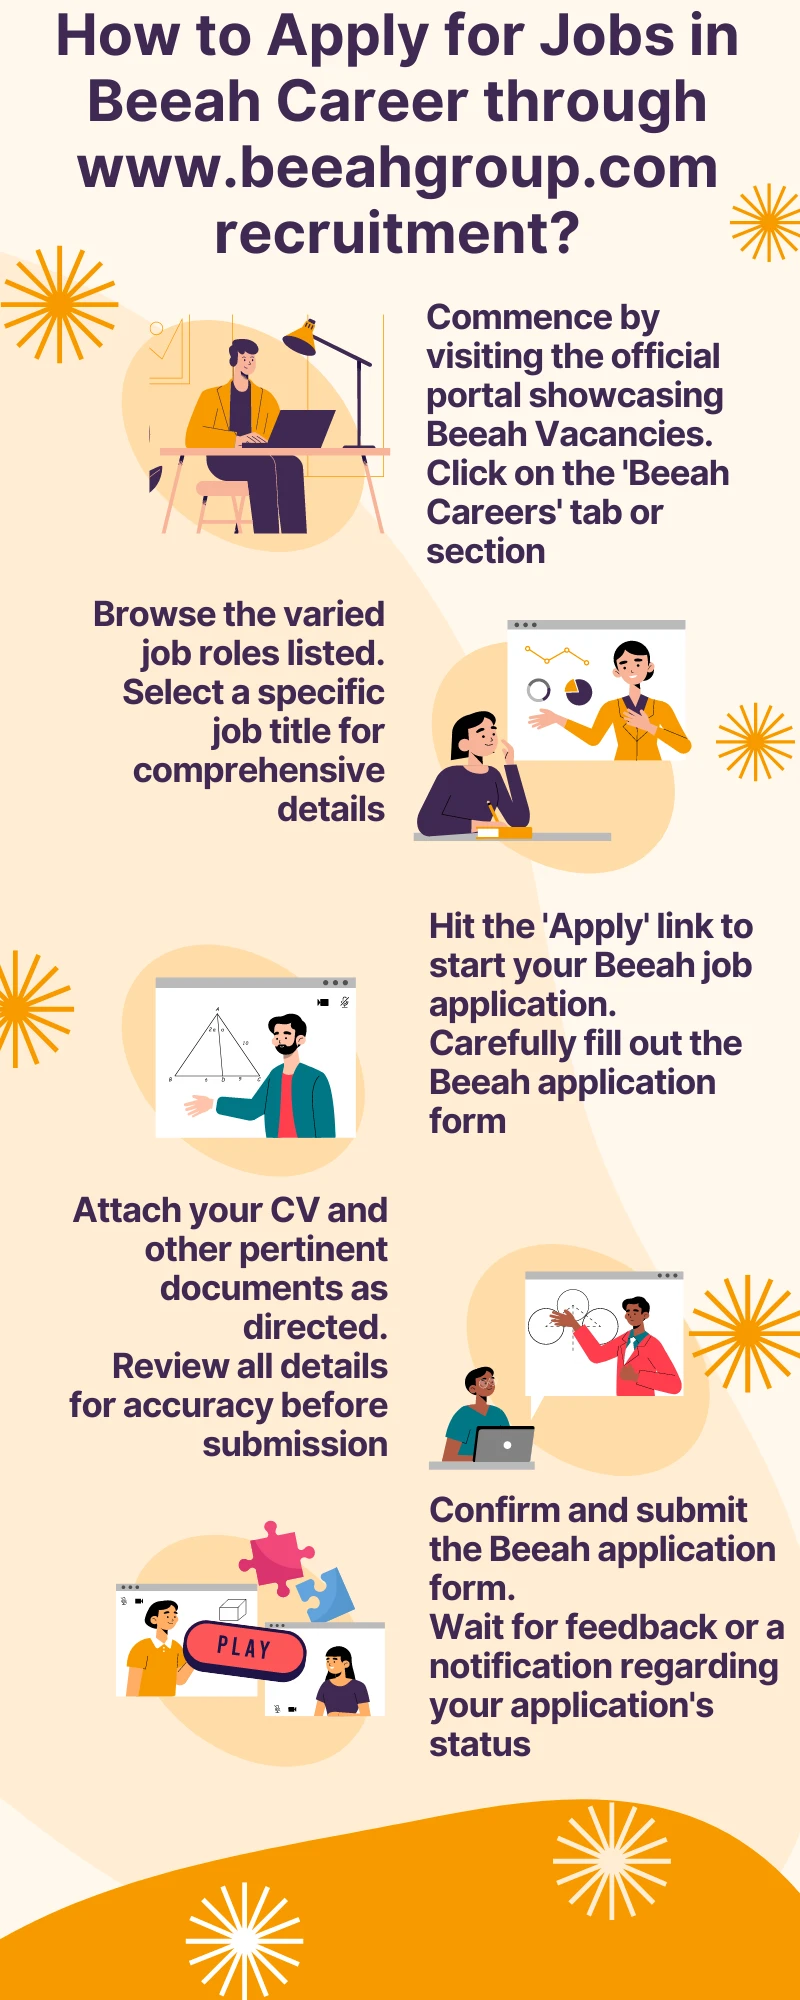 How to Apply for Jobs in Beeah Career through www.beeahgroup.com recruitment?